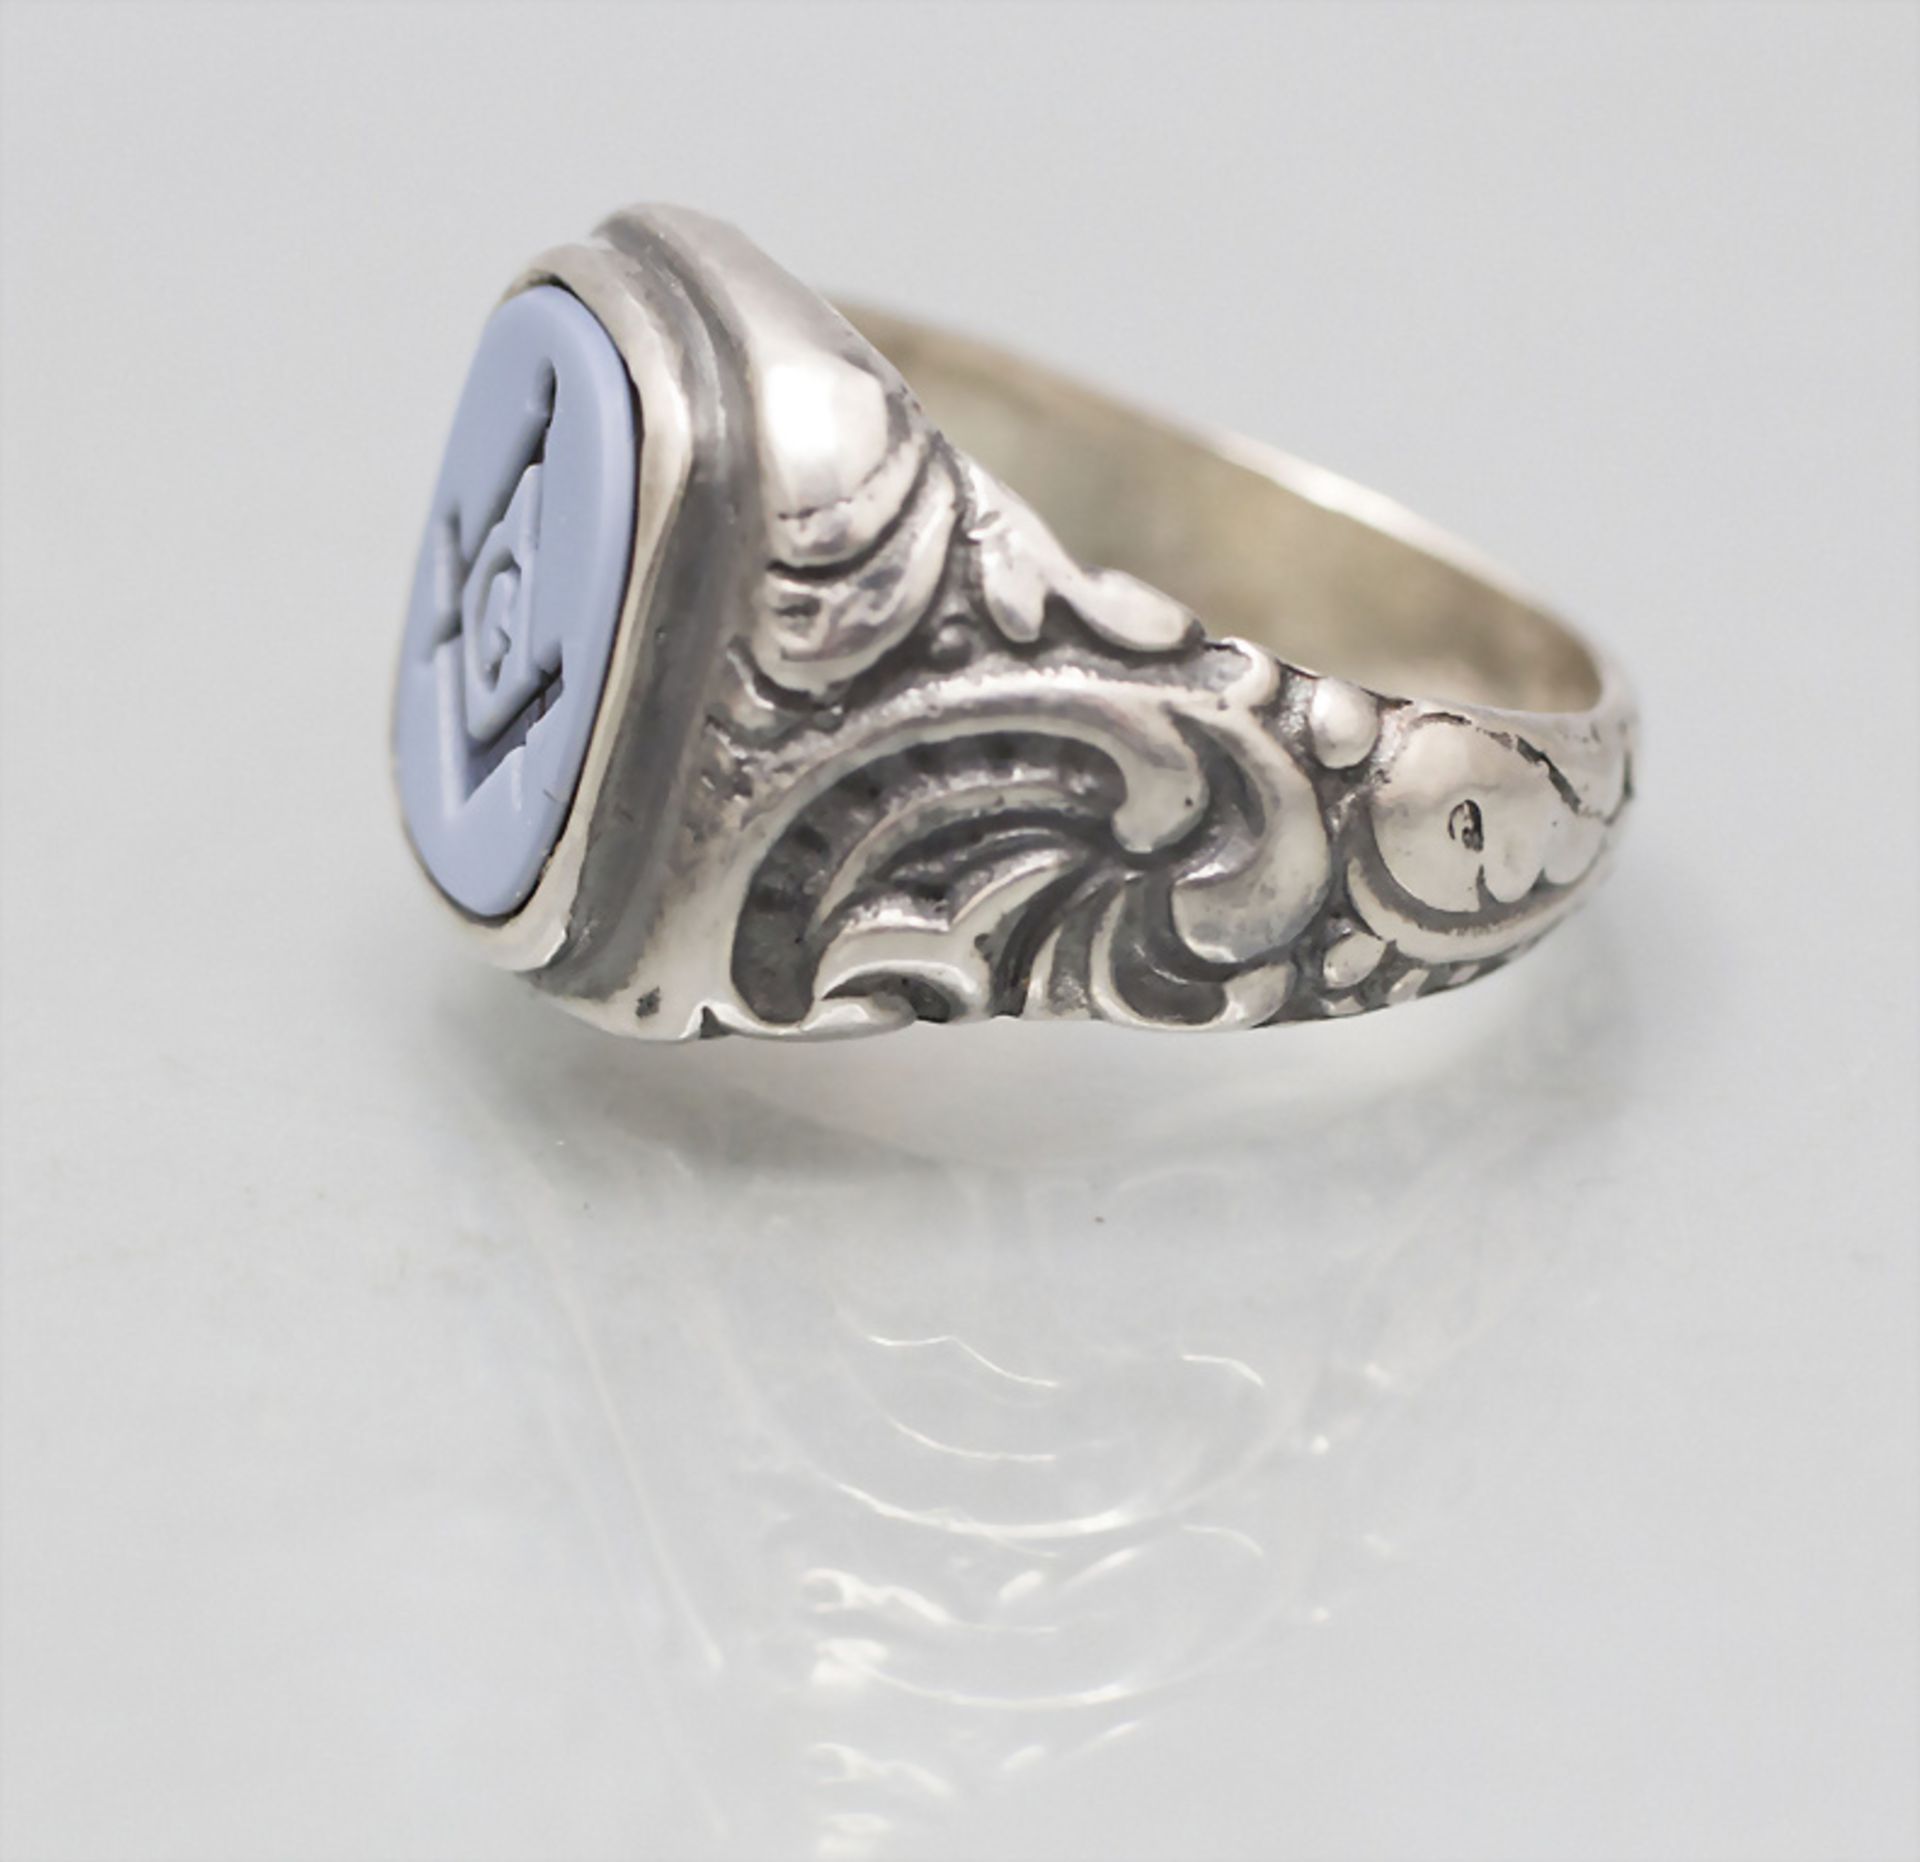 Siegelring / A silver seal ring, 20. Jh. - Image 2 of 3